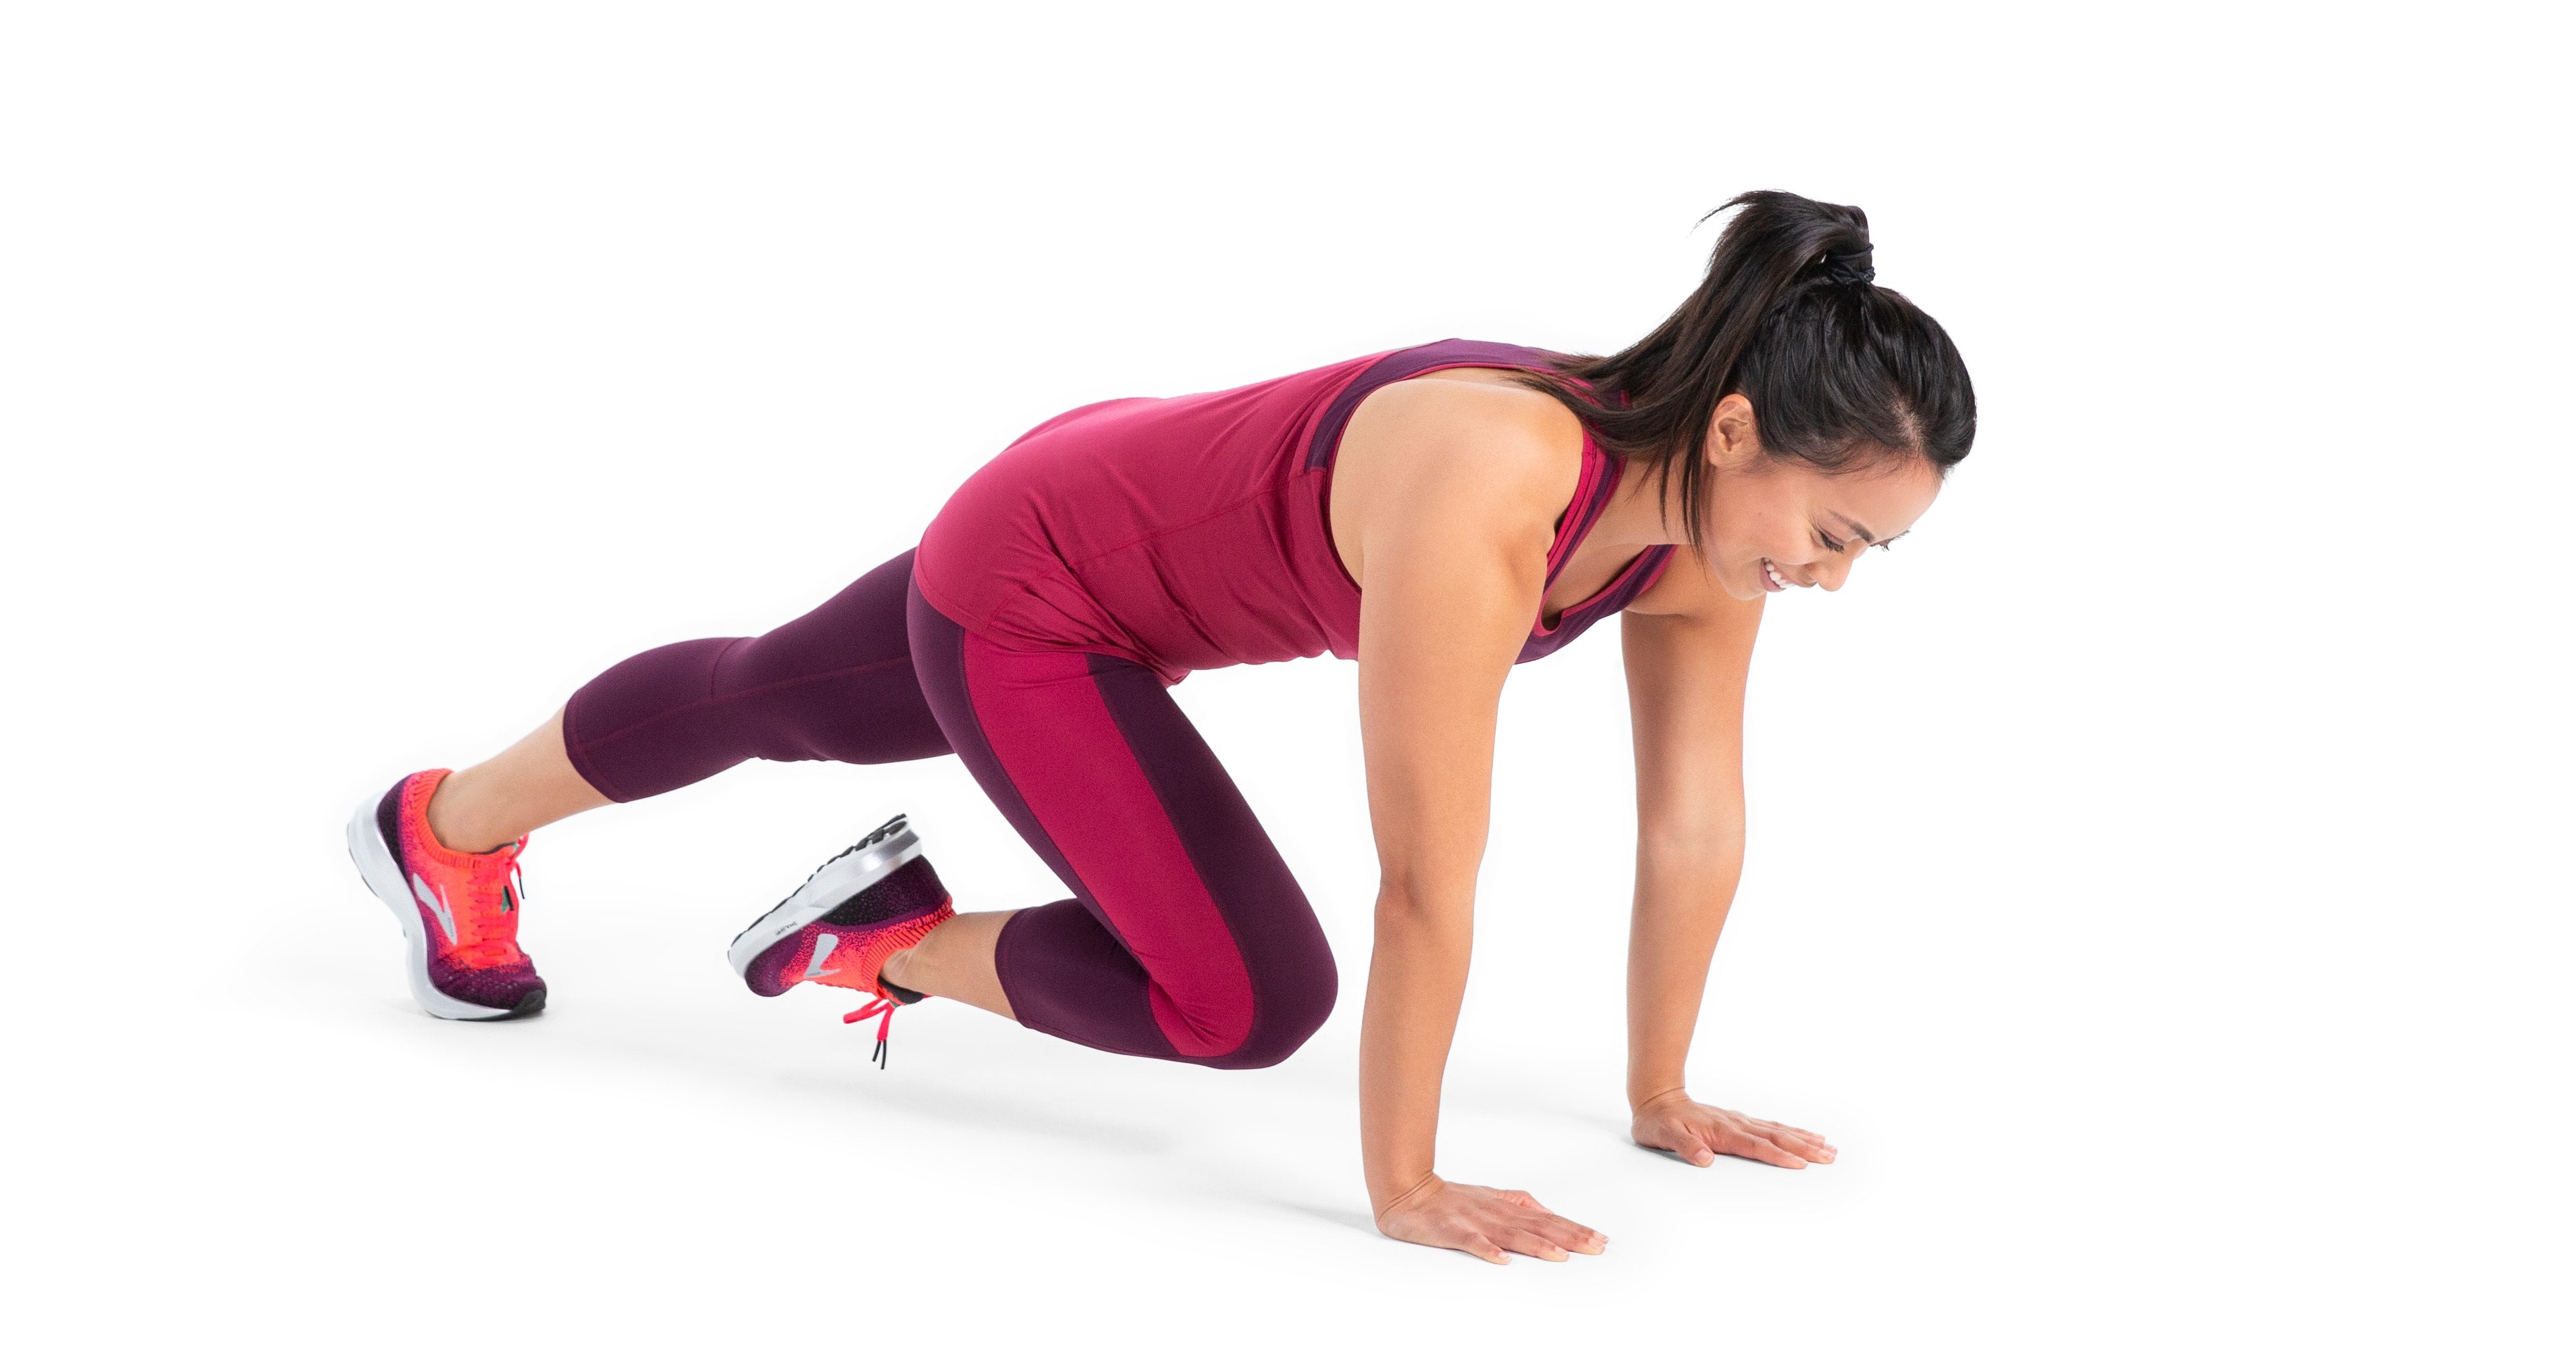 10-Minute Cardio For Abs | POPSUGAR Fitness